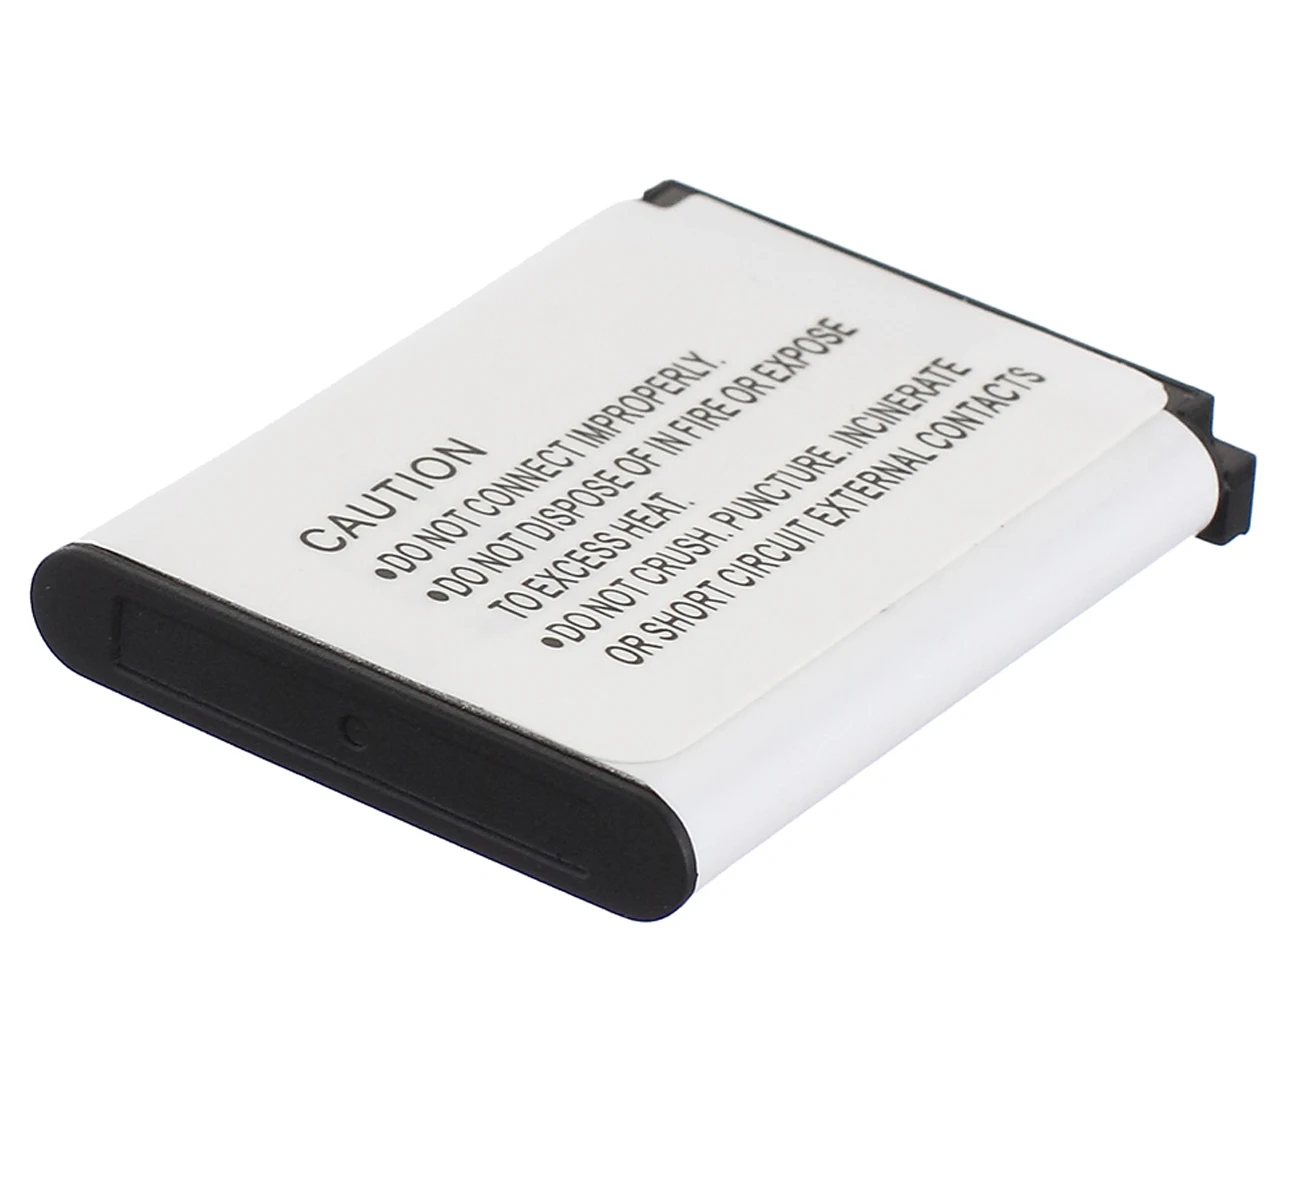 

Battery Pack for Sanyo Xacti VPC-T700, VPC-T700BL, VPC-T700P, VPC-T700T, VPC-T850, VPC-T850BL, VPC-T850CP Digital Camera